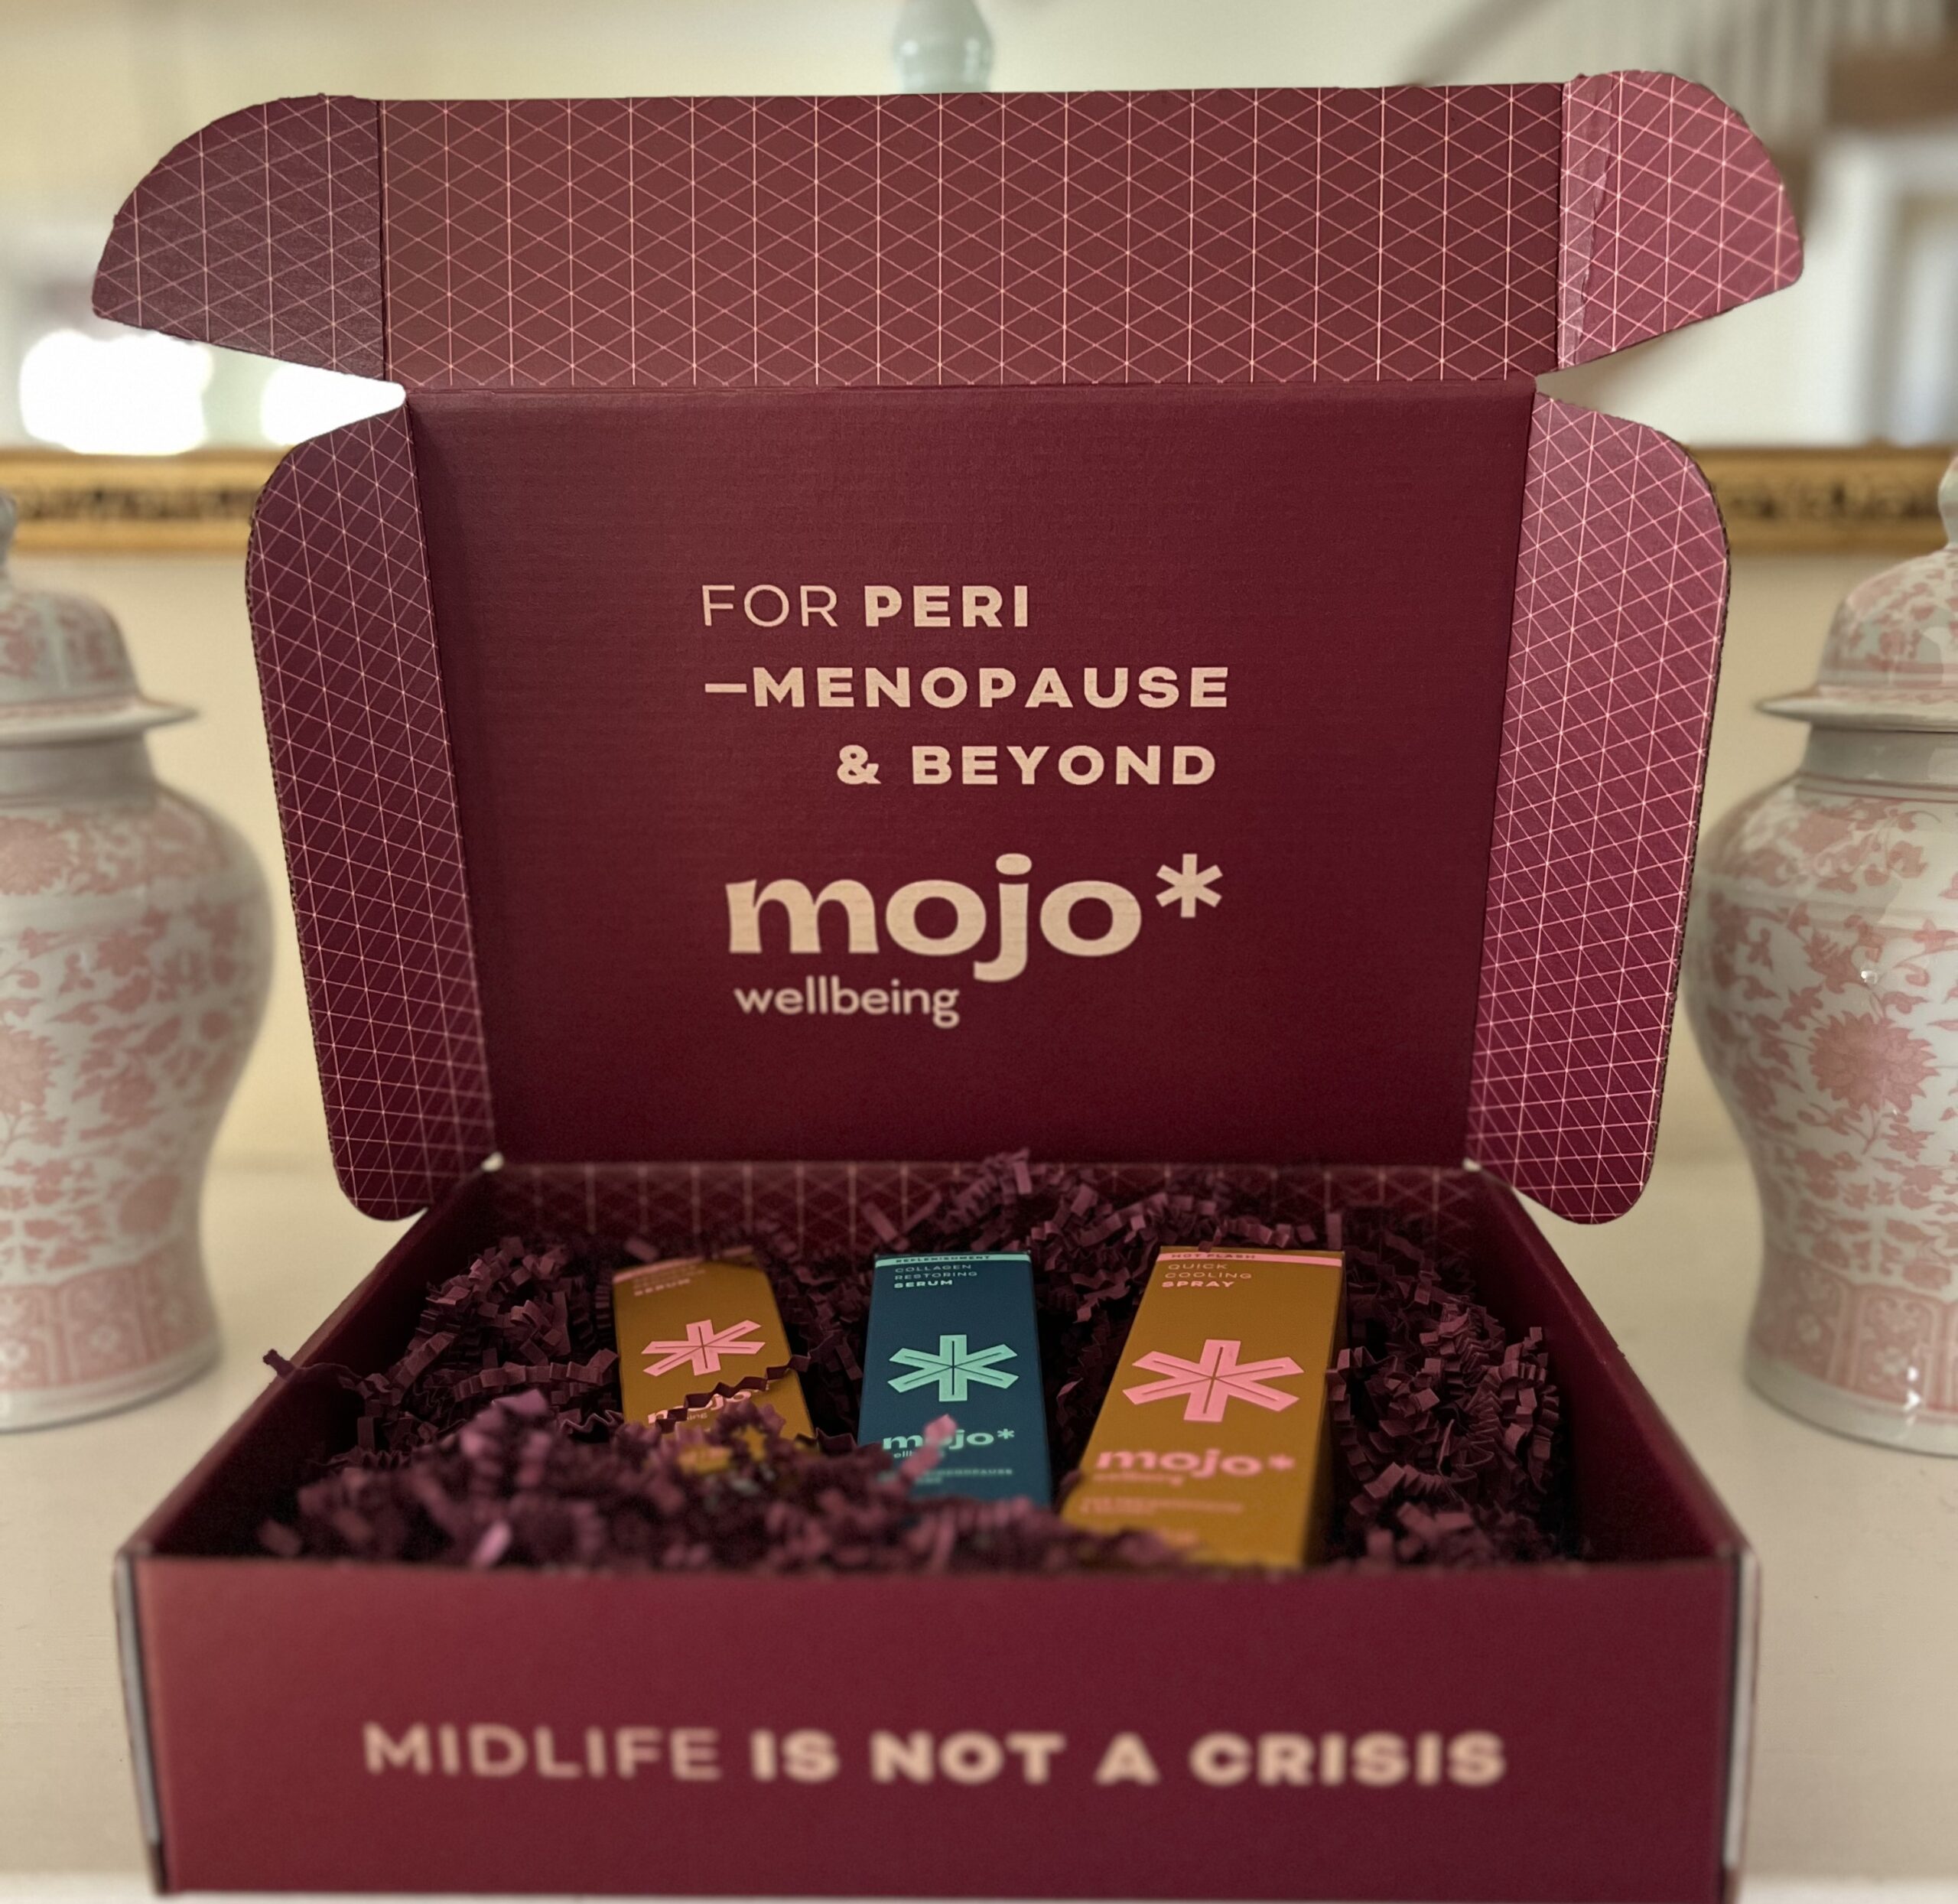 Some of the best selling Mojo Wellbeing products for periomenopause